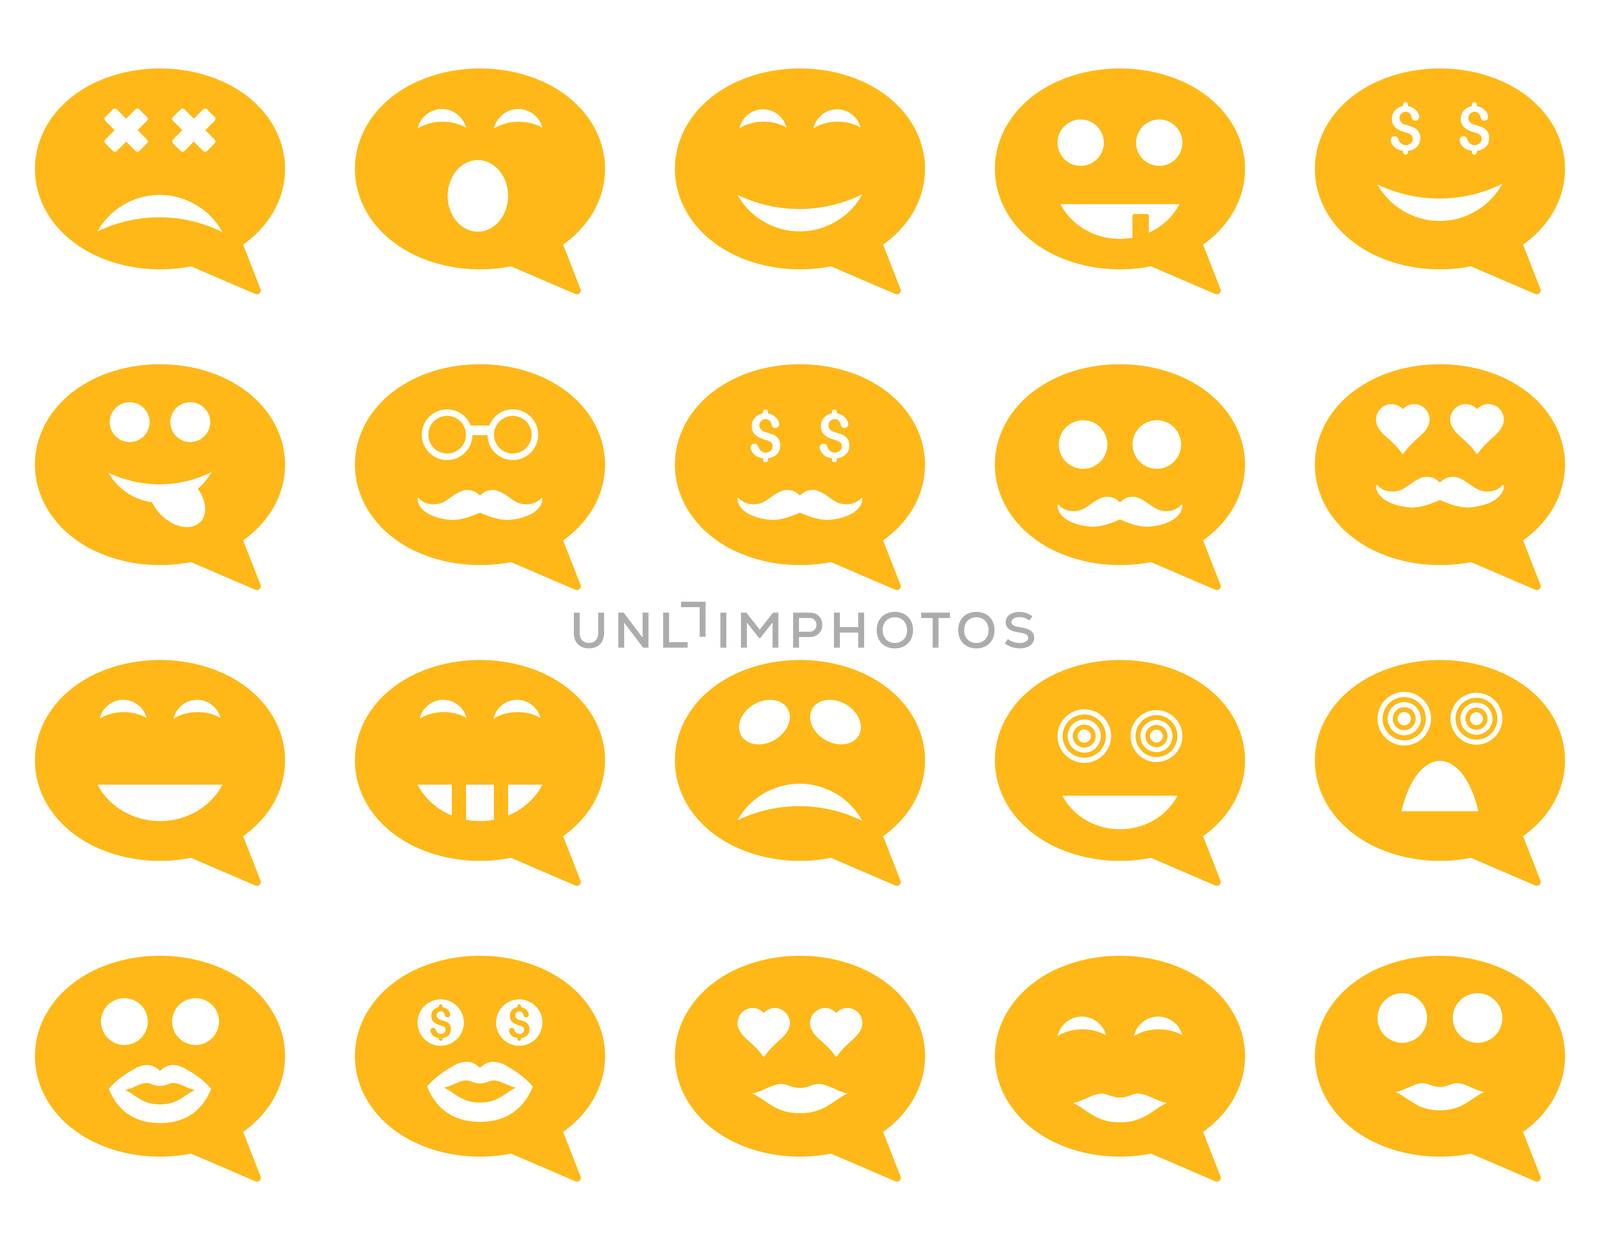 Chat emotion smile icons. Glyph set style is flat images, yellow symbols, isolated on a white background.